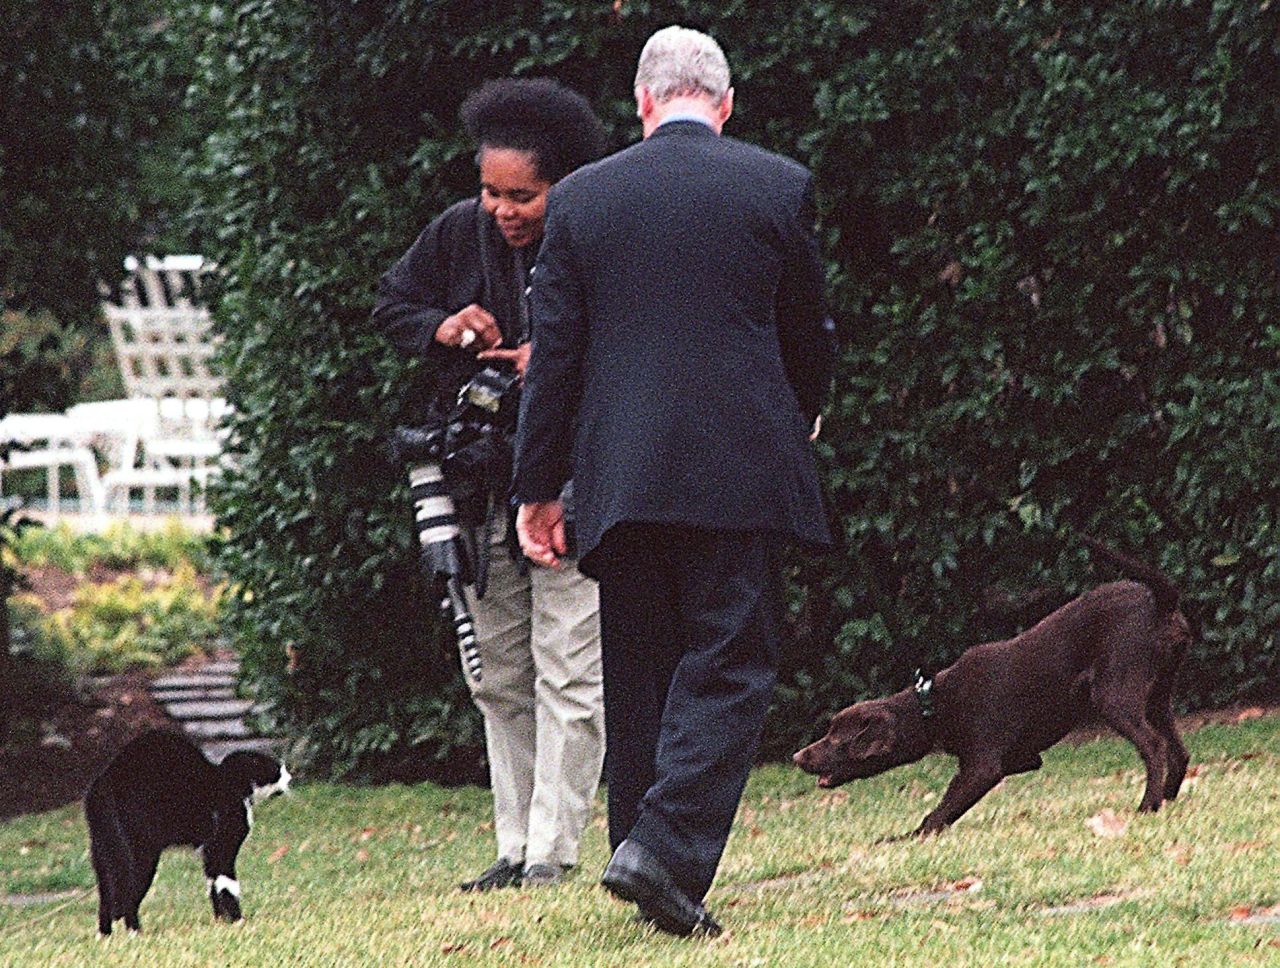 Sharon Farmer was the first African-American to be hired as the chief official White House photographer — a position that only 12 people have held since it was created in 1961. Farmer covered President Bill Clinton, who is seen here with his dog Buddy and his cat Socks. Farmer started working in the Clinton White House in 1993, and she was promoted to chief official White House photographer in 1998.